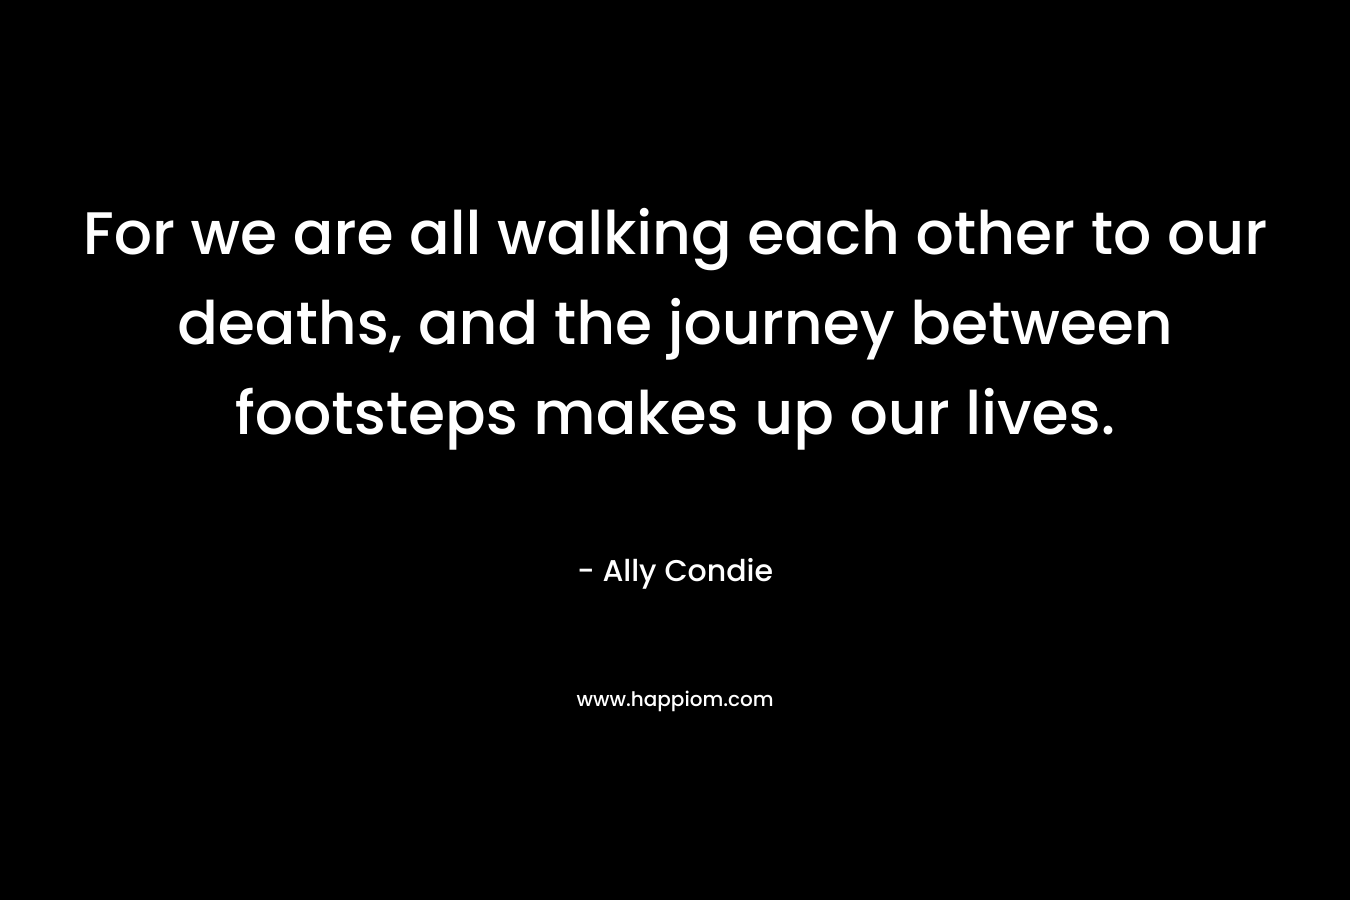 For we are all walking each other to our deaths, and the journey between footsteps makes up our lives. – Ally Condie